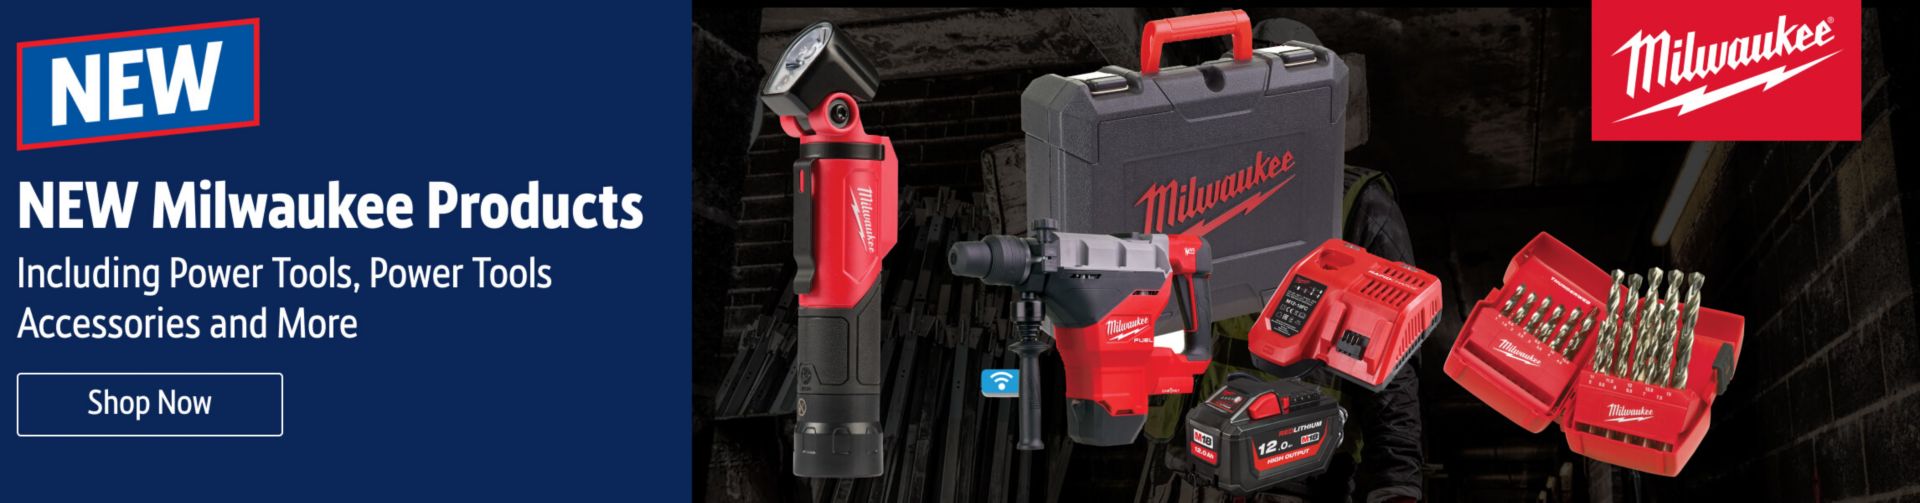 New Milwaukee Products Including Power Tools, Power Tool Accessories and More